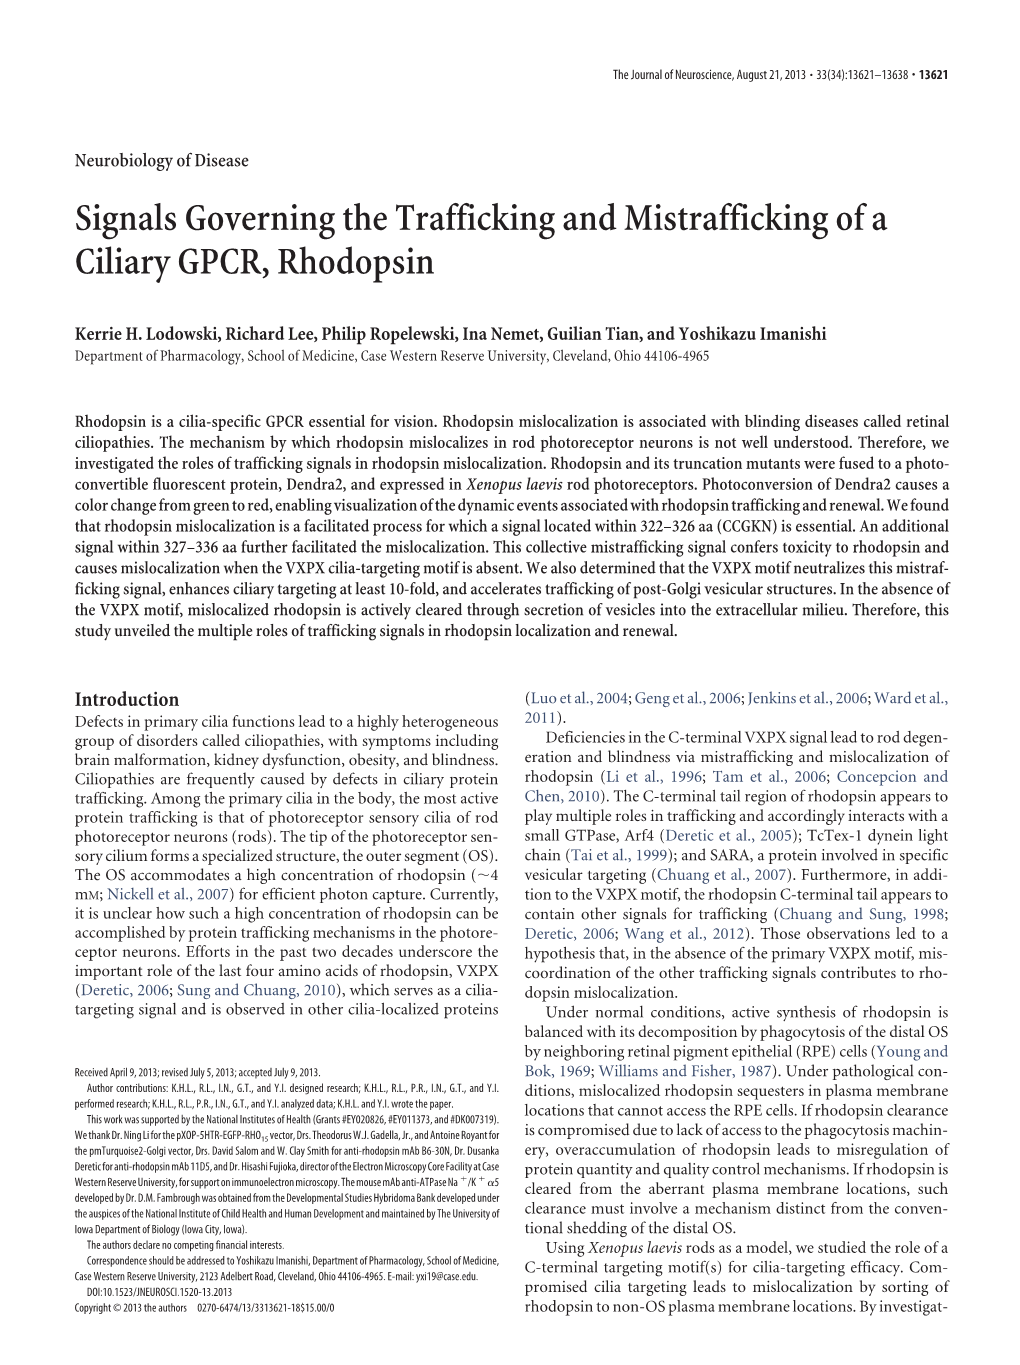 Signals Governing the Trafficking and Mistrafficking of a Ciliary GPCR, Rhodopsin